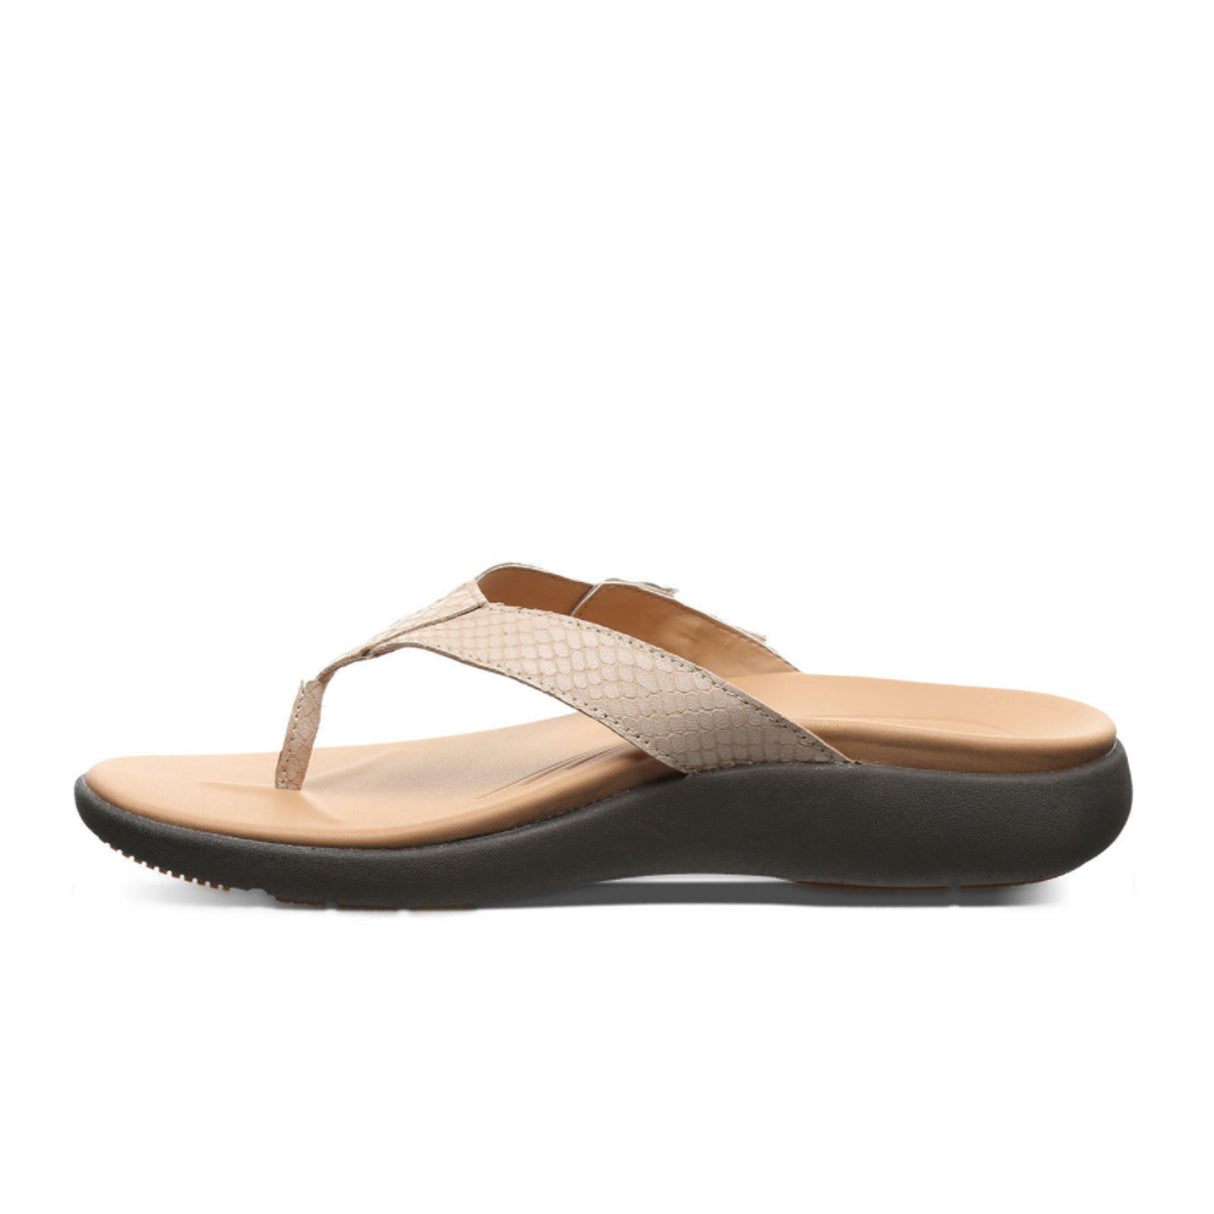 Strole Coaster Thong Sandal (Women) - Natural Sandals - Thong - The Heel Shoe Fitters